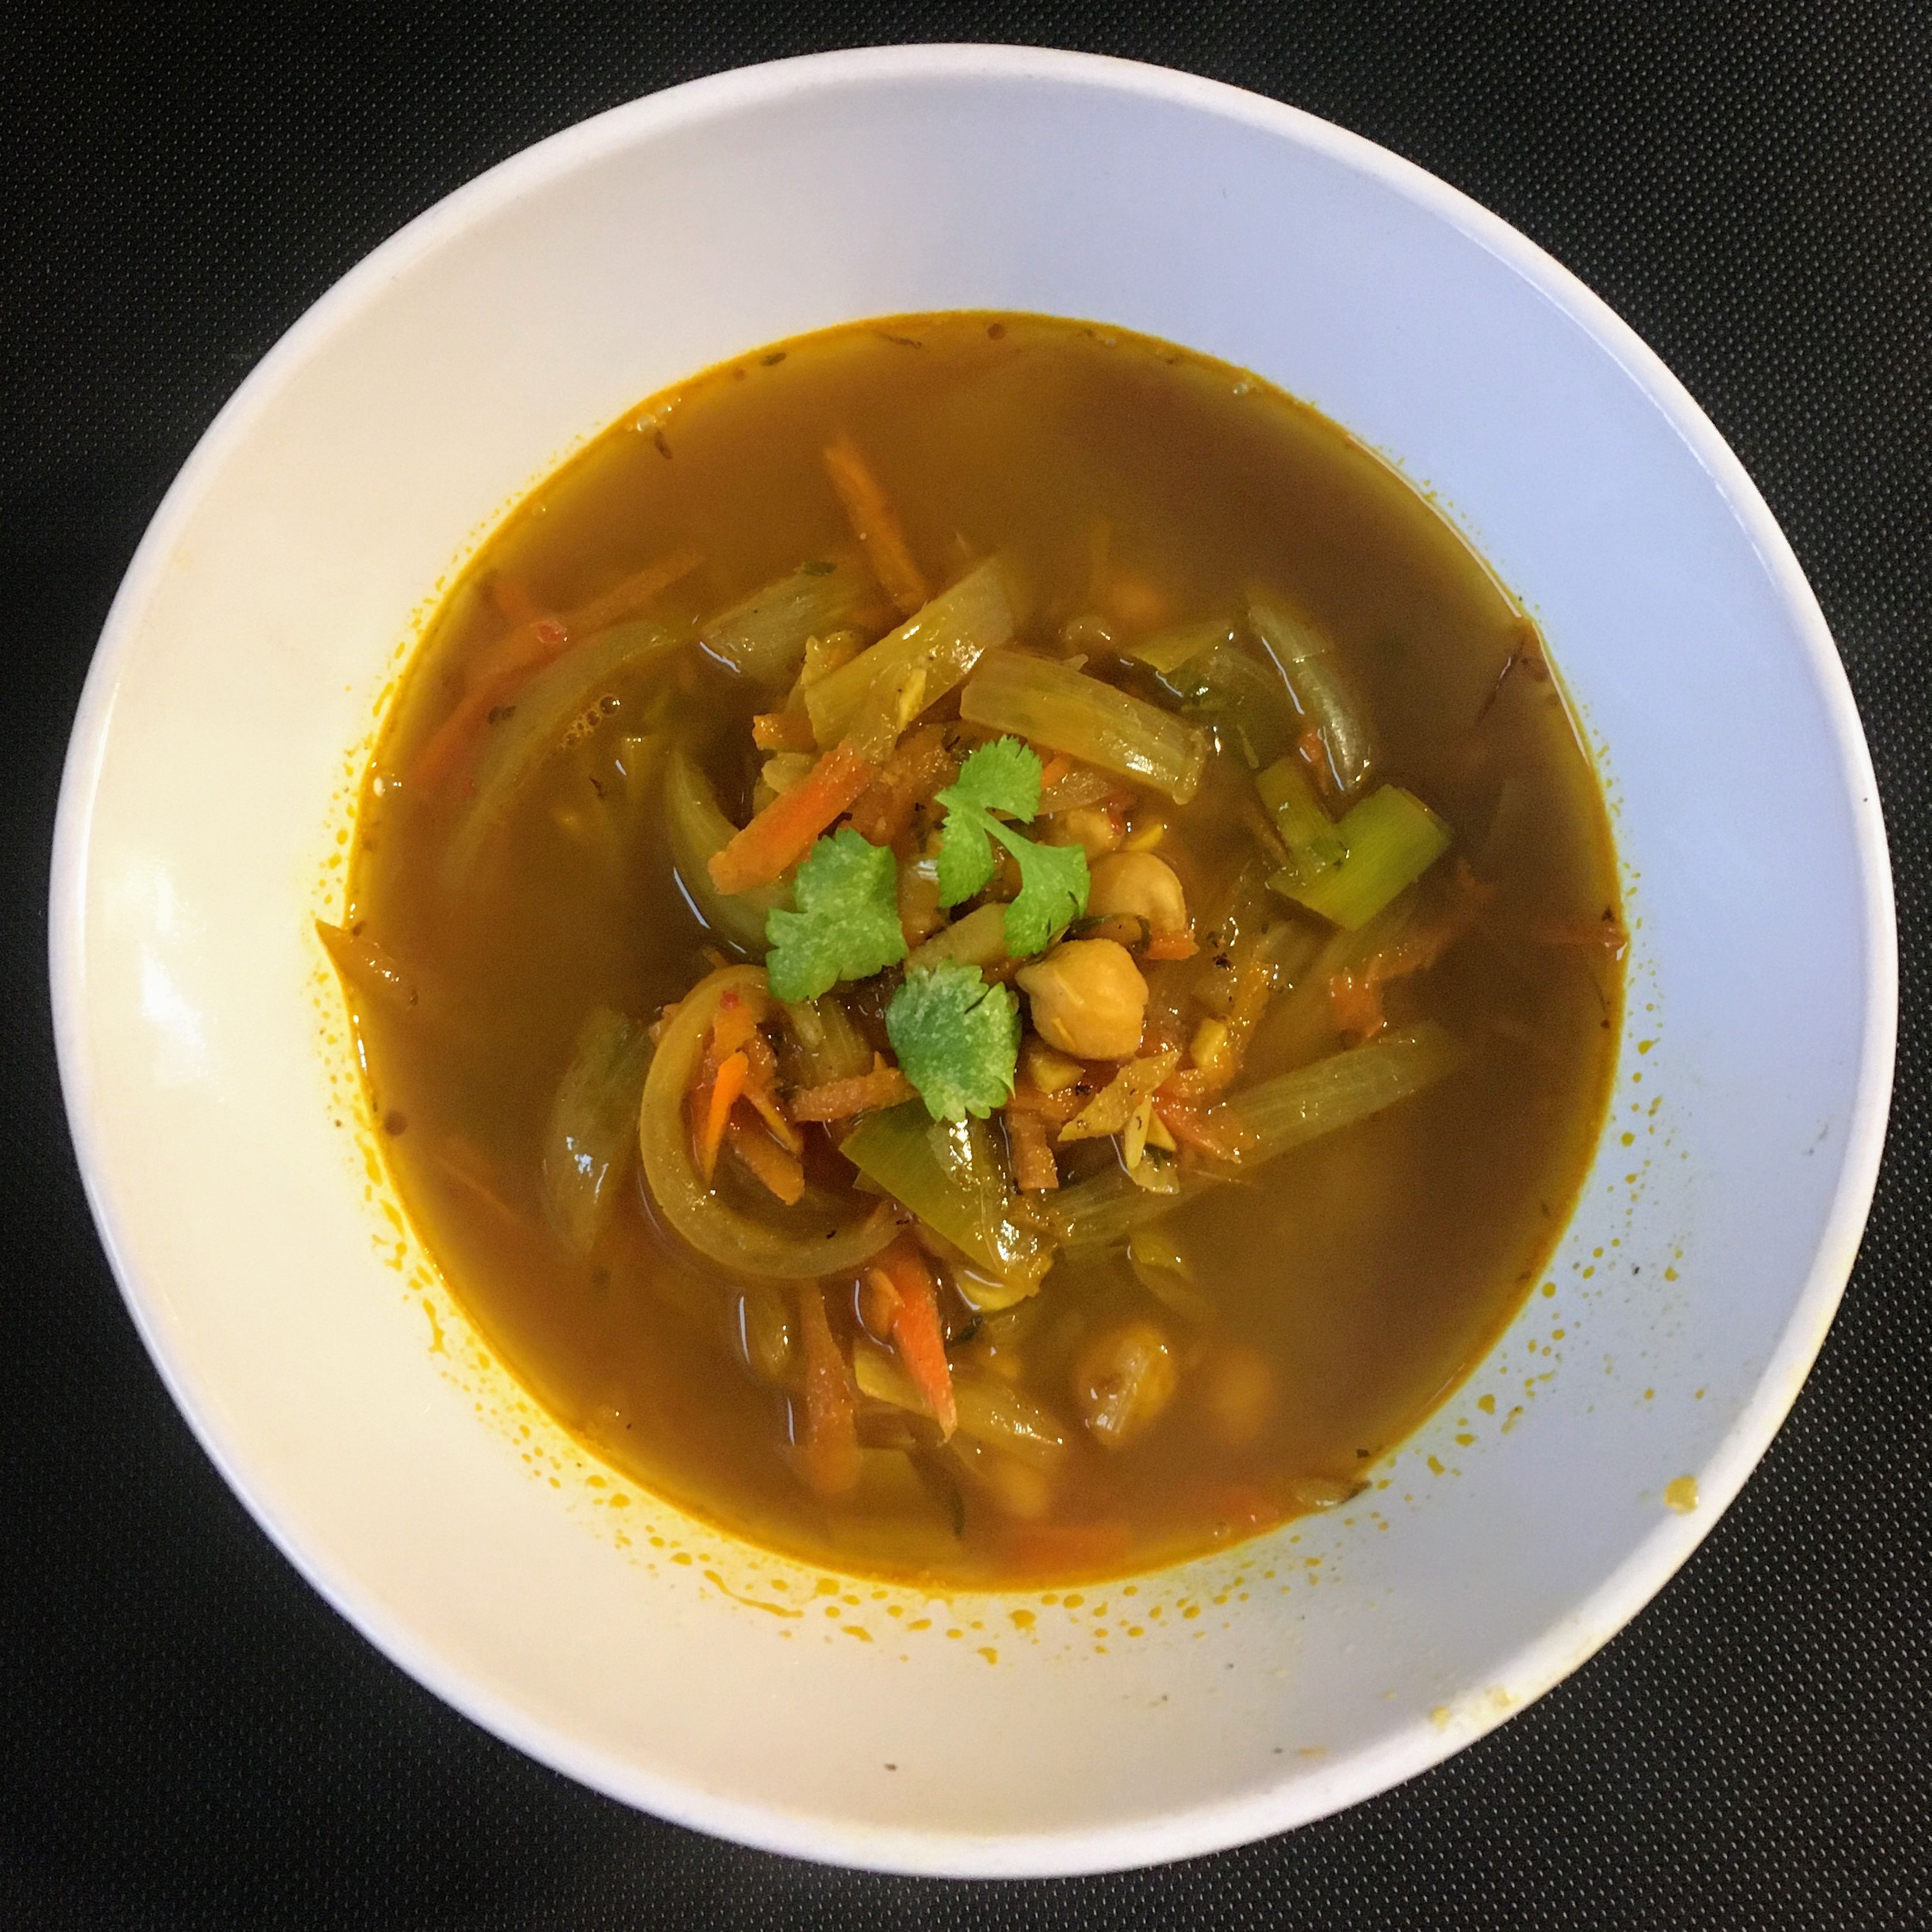 Ginger turmeric chickpea soup ( Back to health soup)